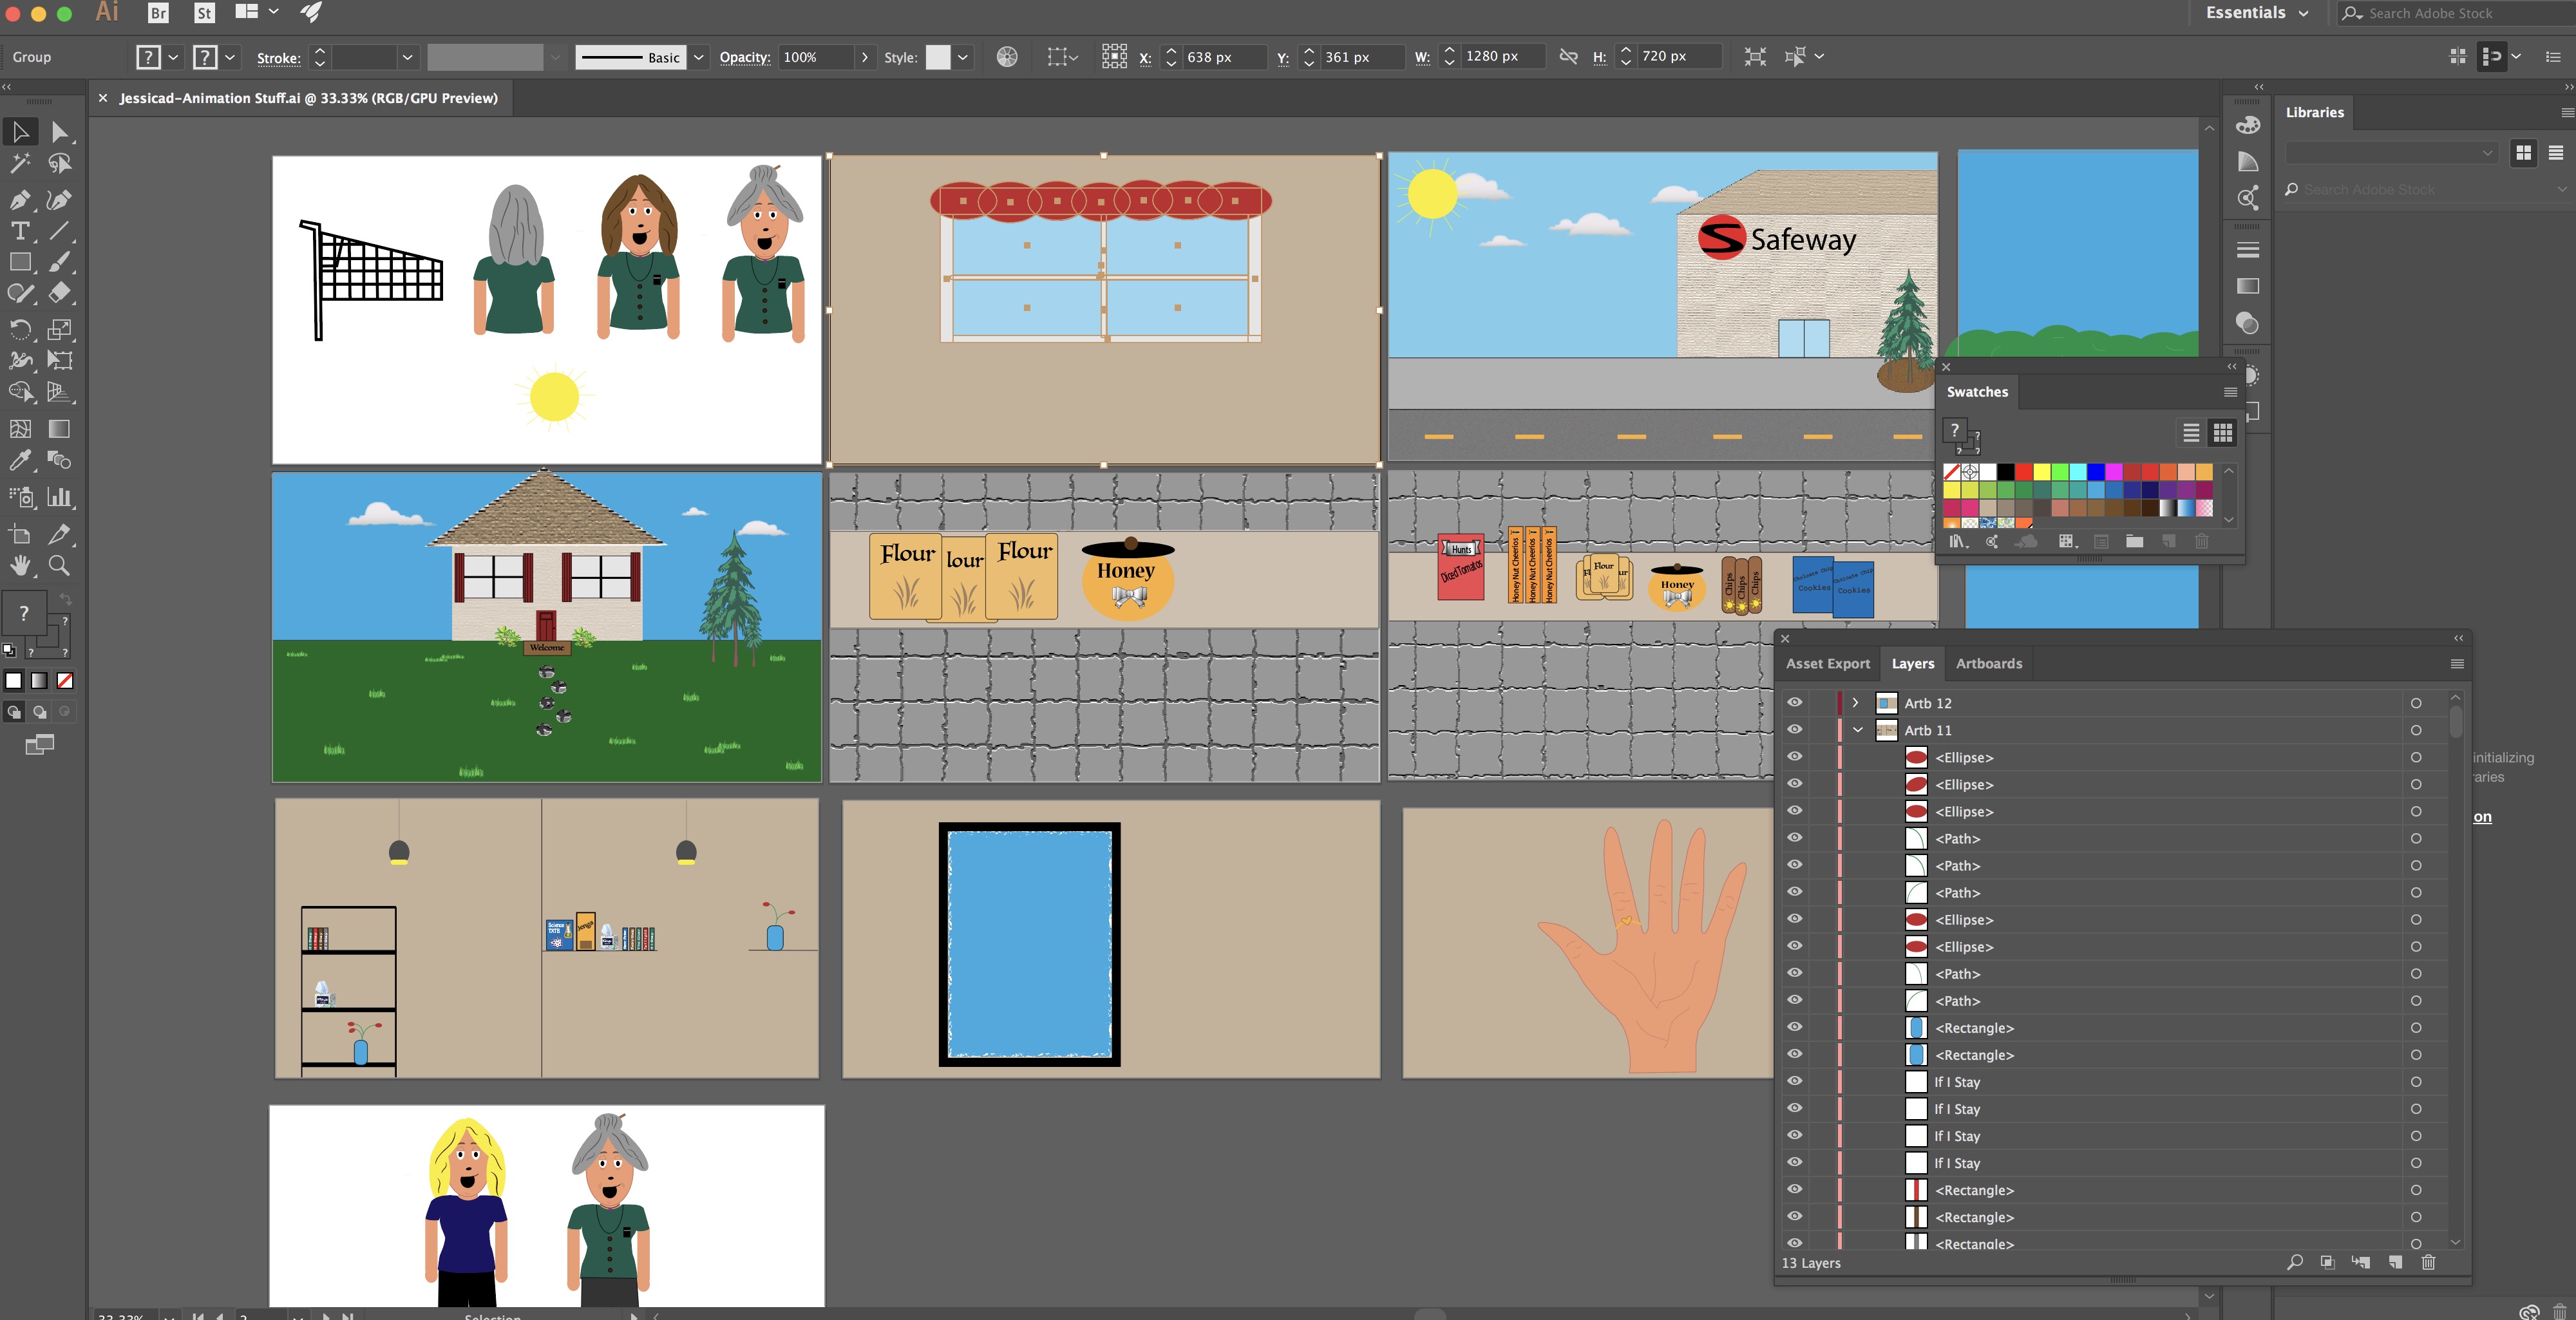 This is a screenshot of my charaters and backgroud being produced for my animation in Illustrator. 